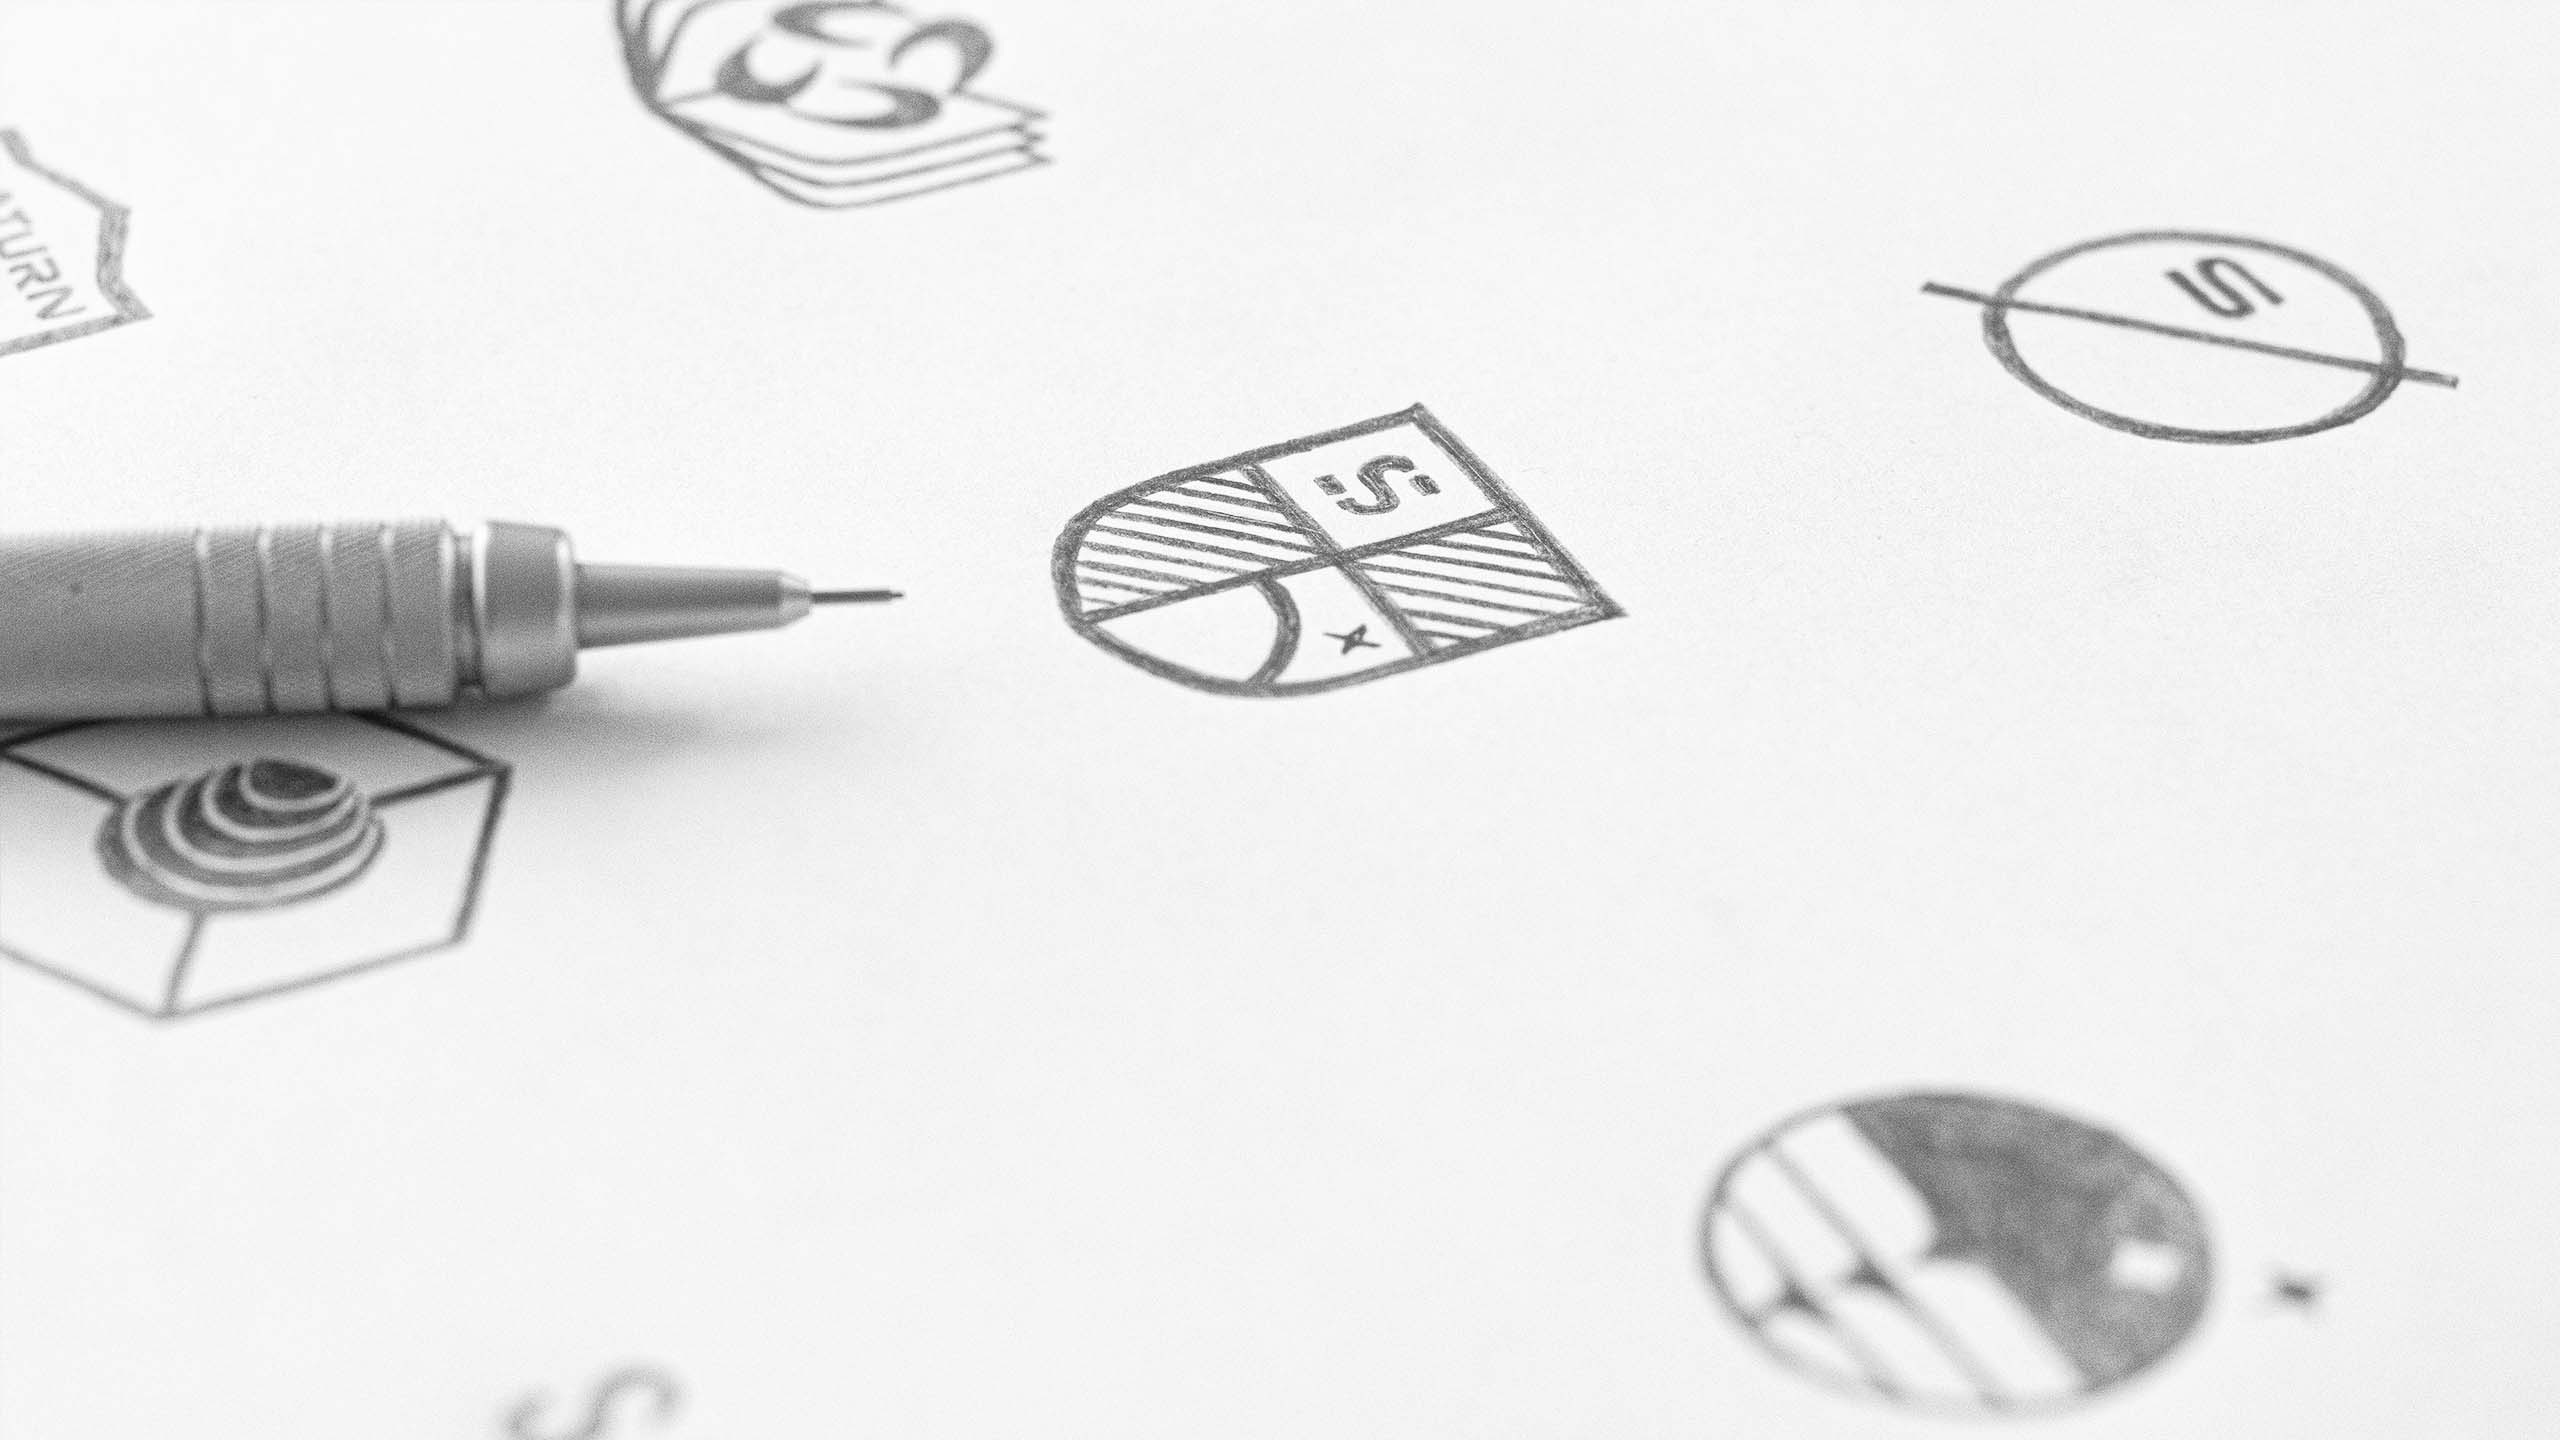 Hand-drawn sketches for the IES logos.